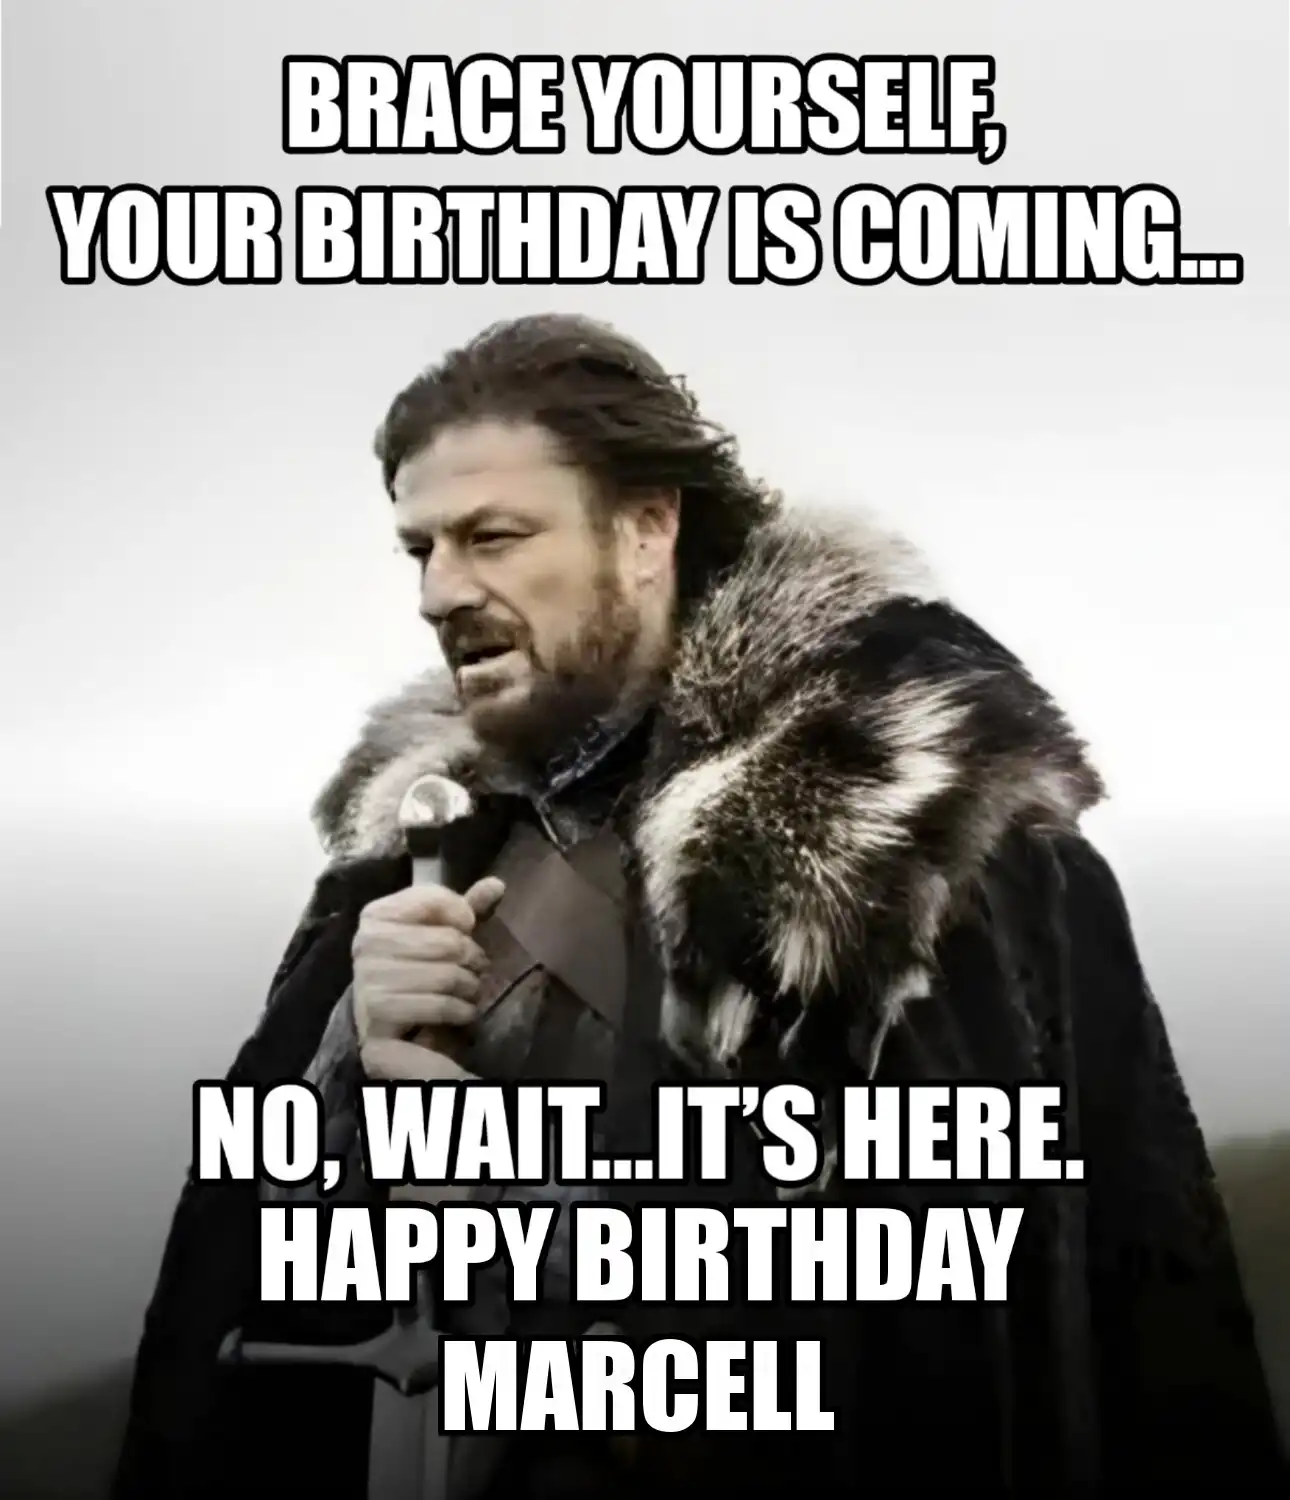 Happy Birthday Marcell Brace Yourself Your Birthday Is Coming Meme